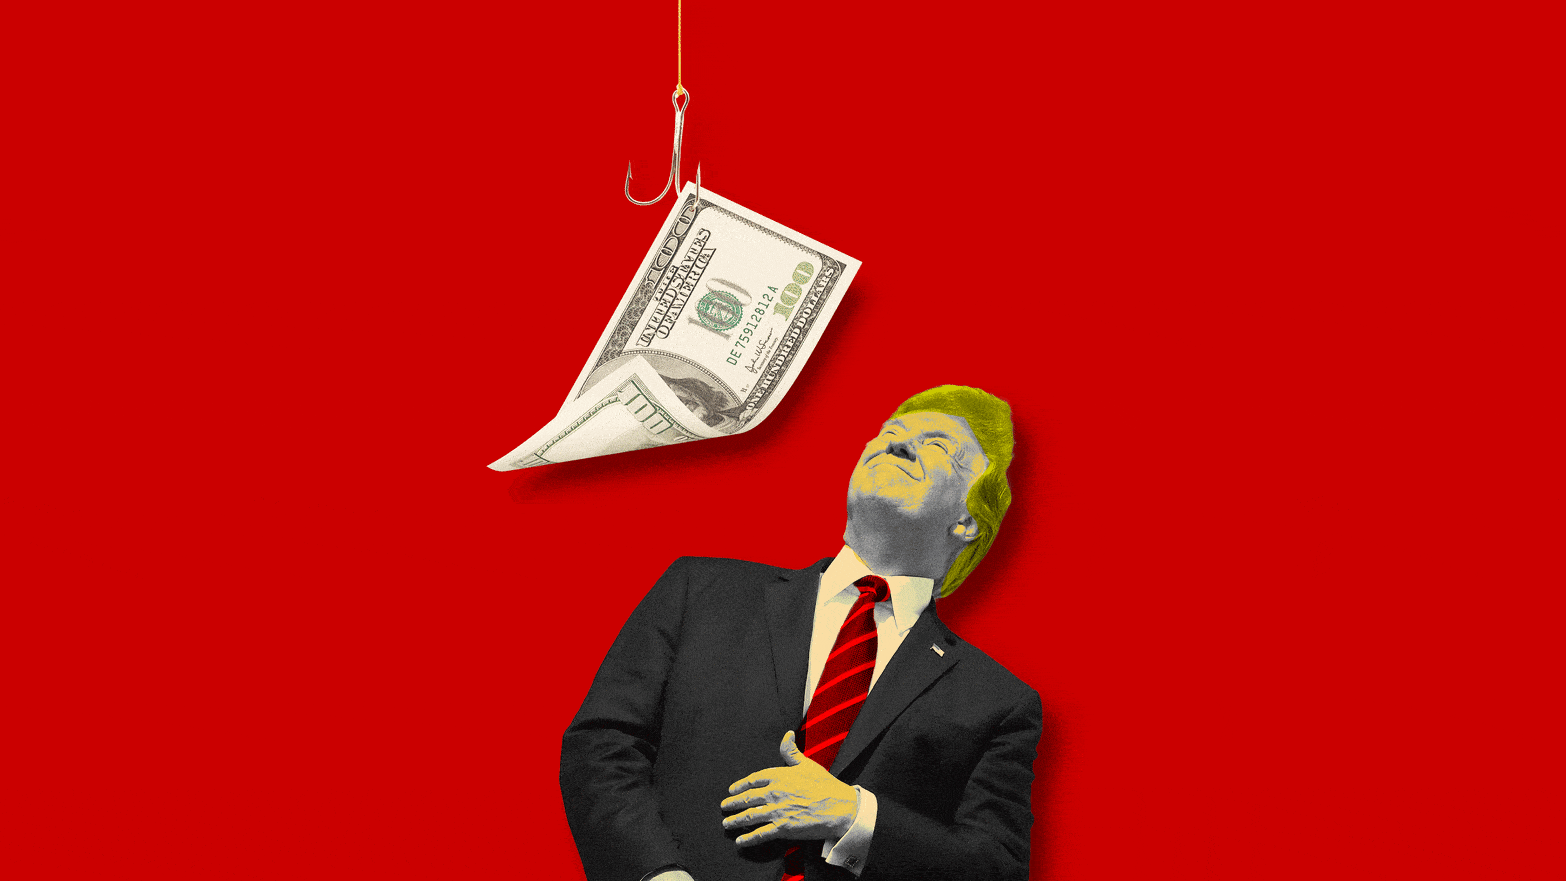 A photo illustration of a hundred dollar bill on a fish hook and Donald Trump.